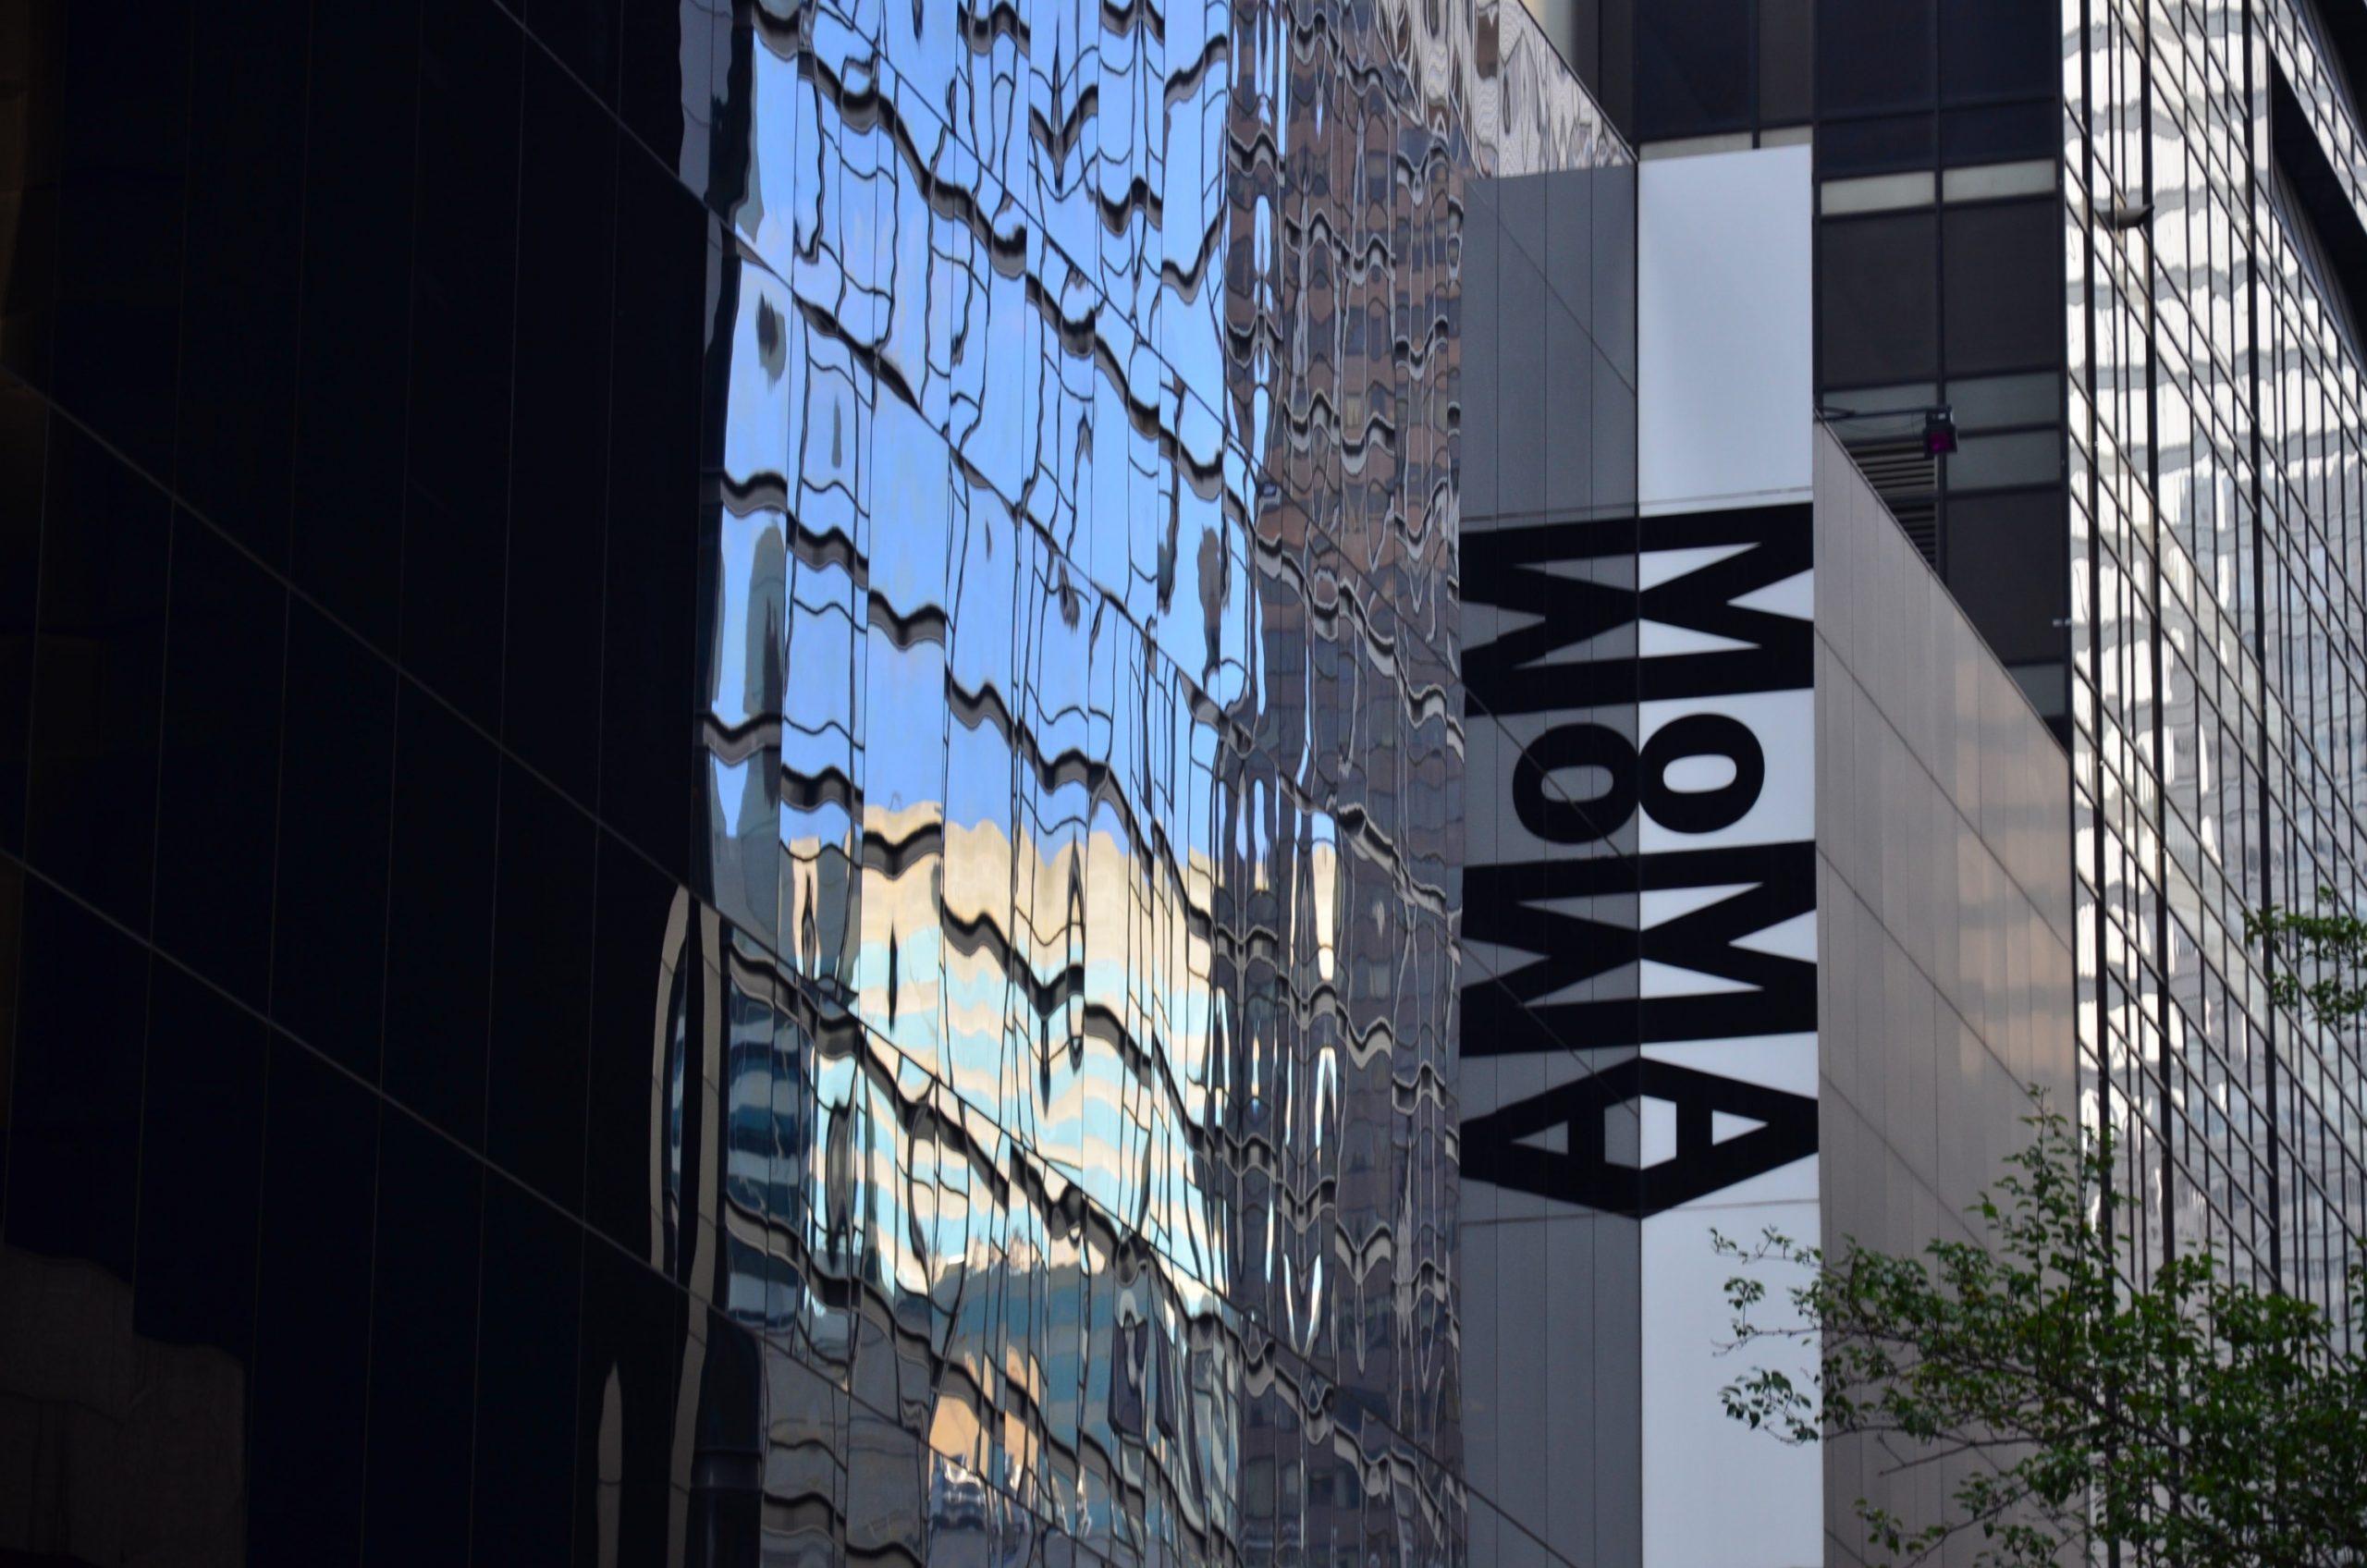 How to Get the Most From the MoMA in New York City – Blog